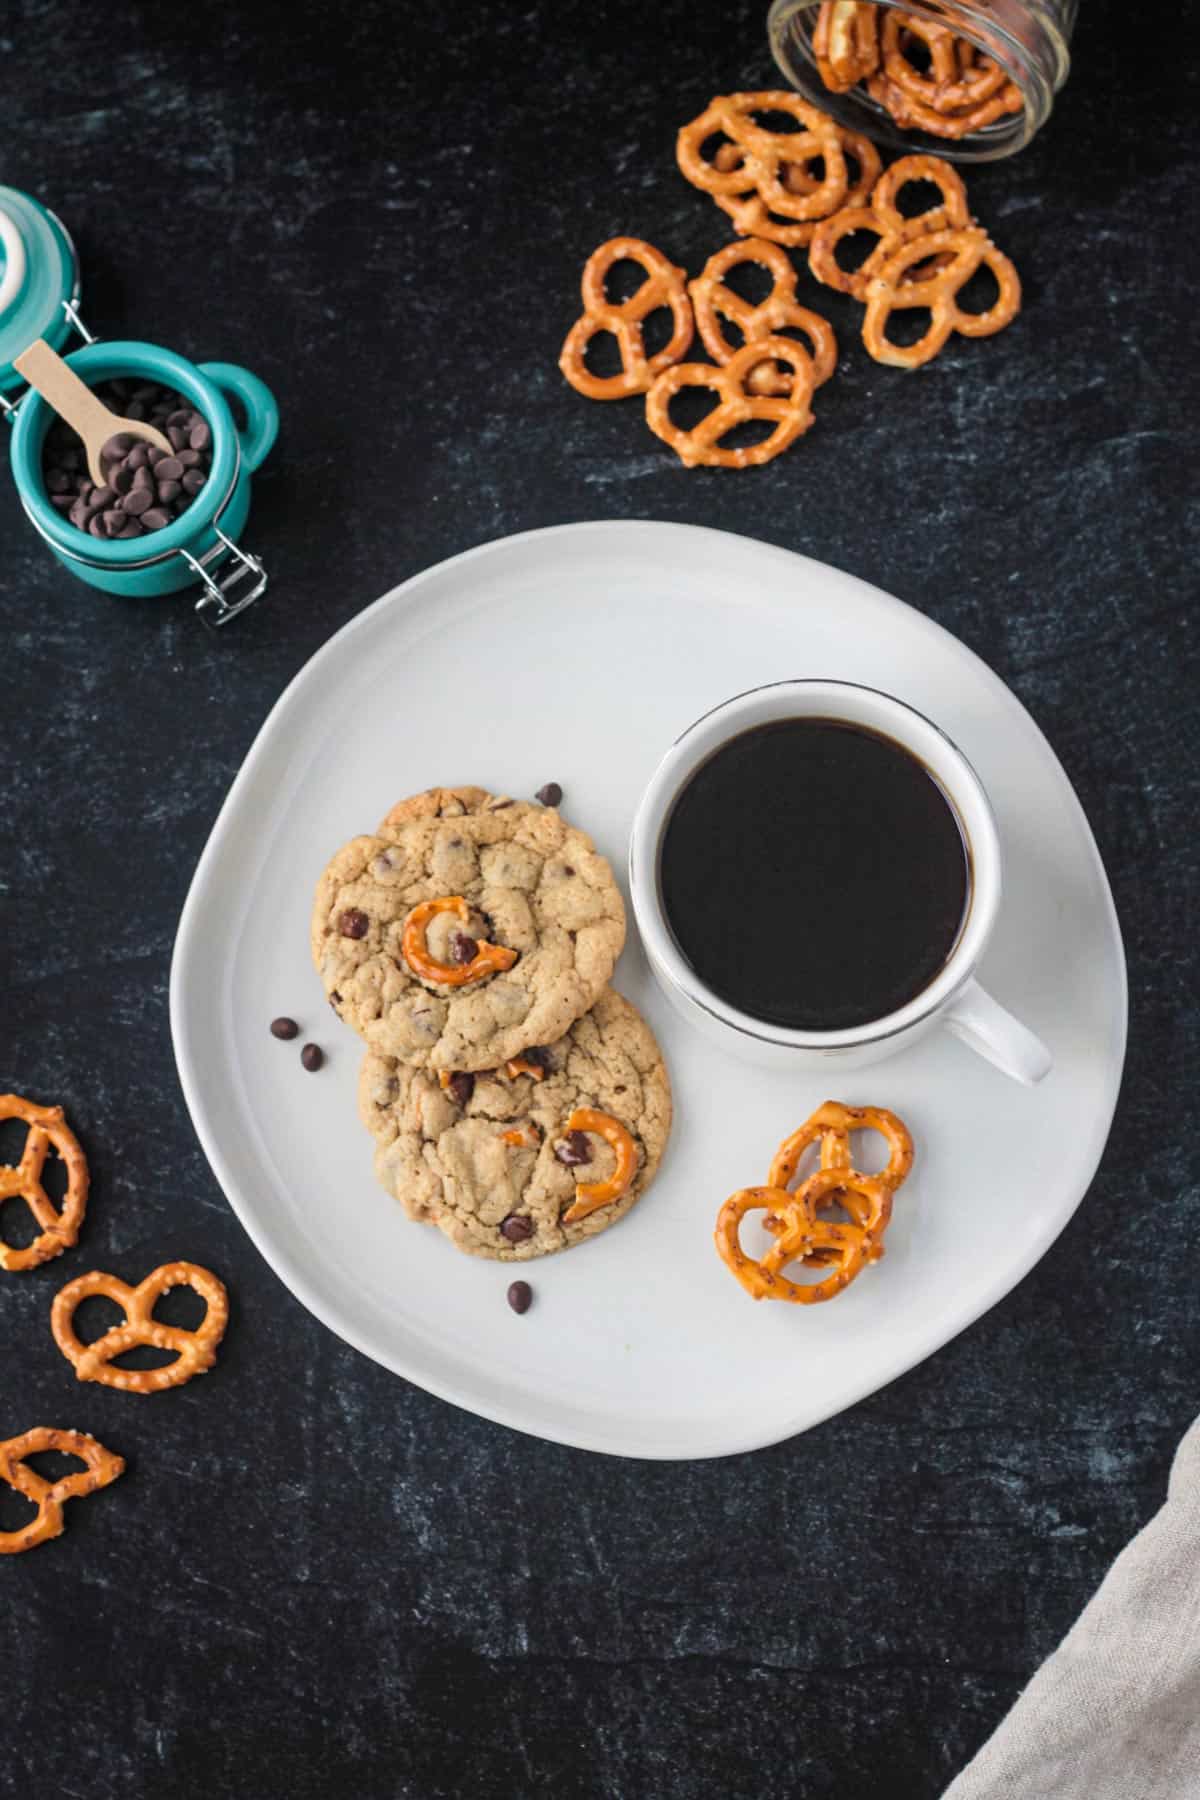 Two chocolate chip pretzel cookies on a plate with a cup of coffee.